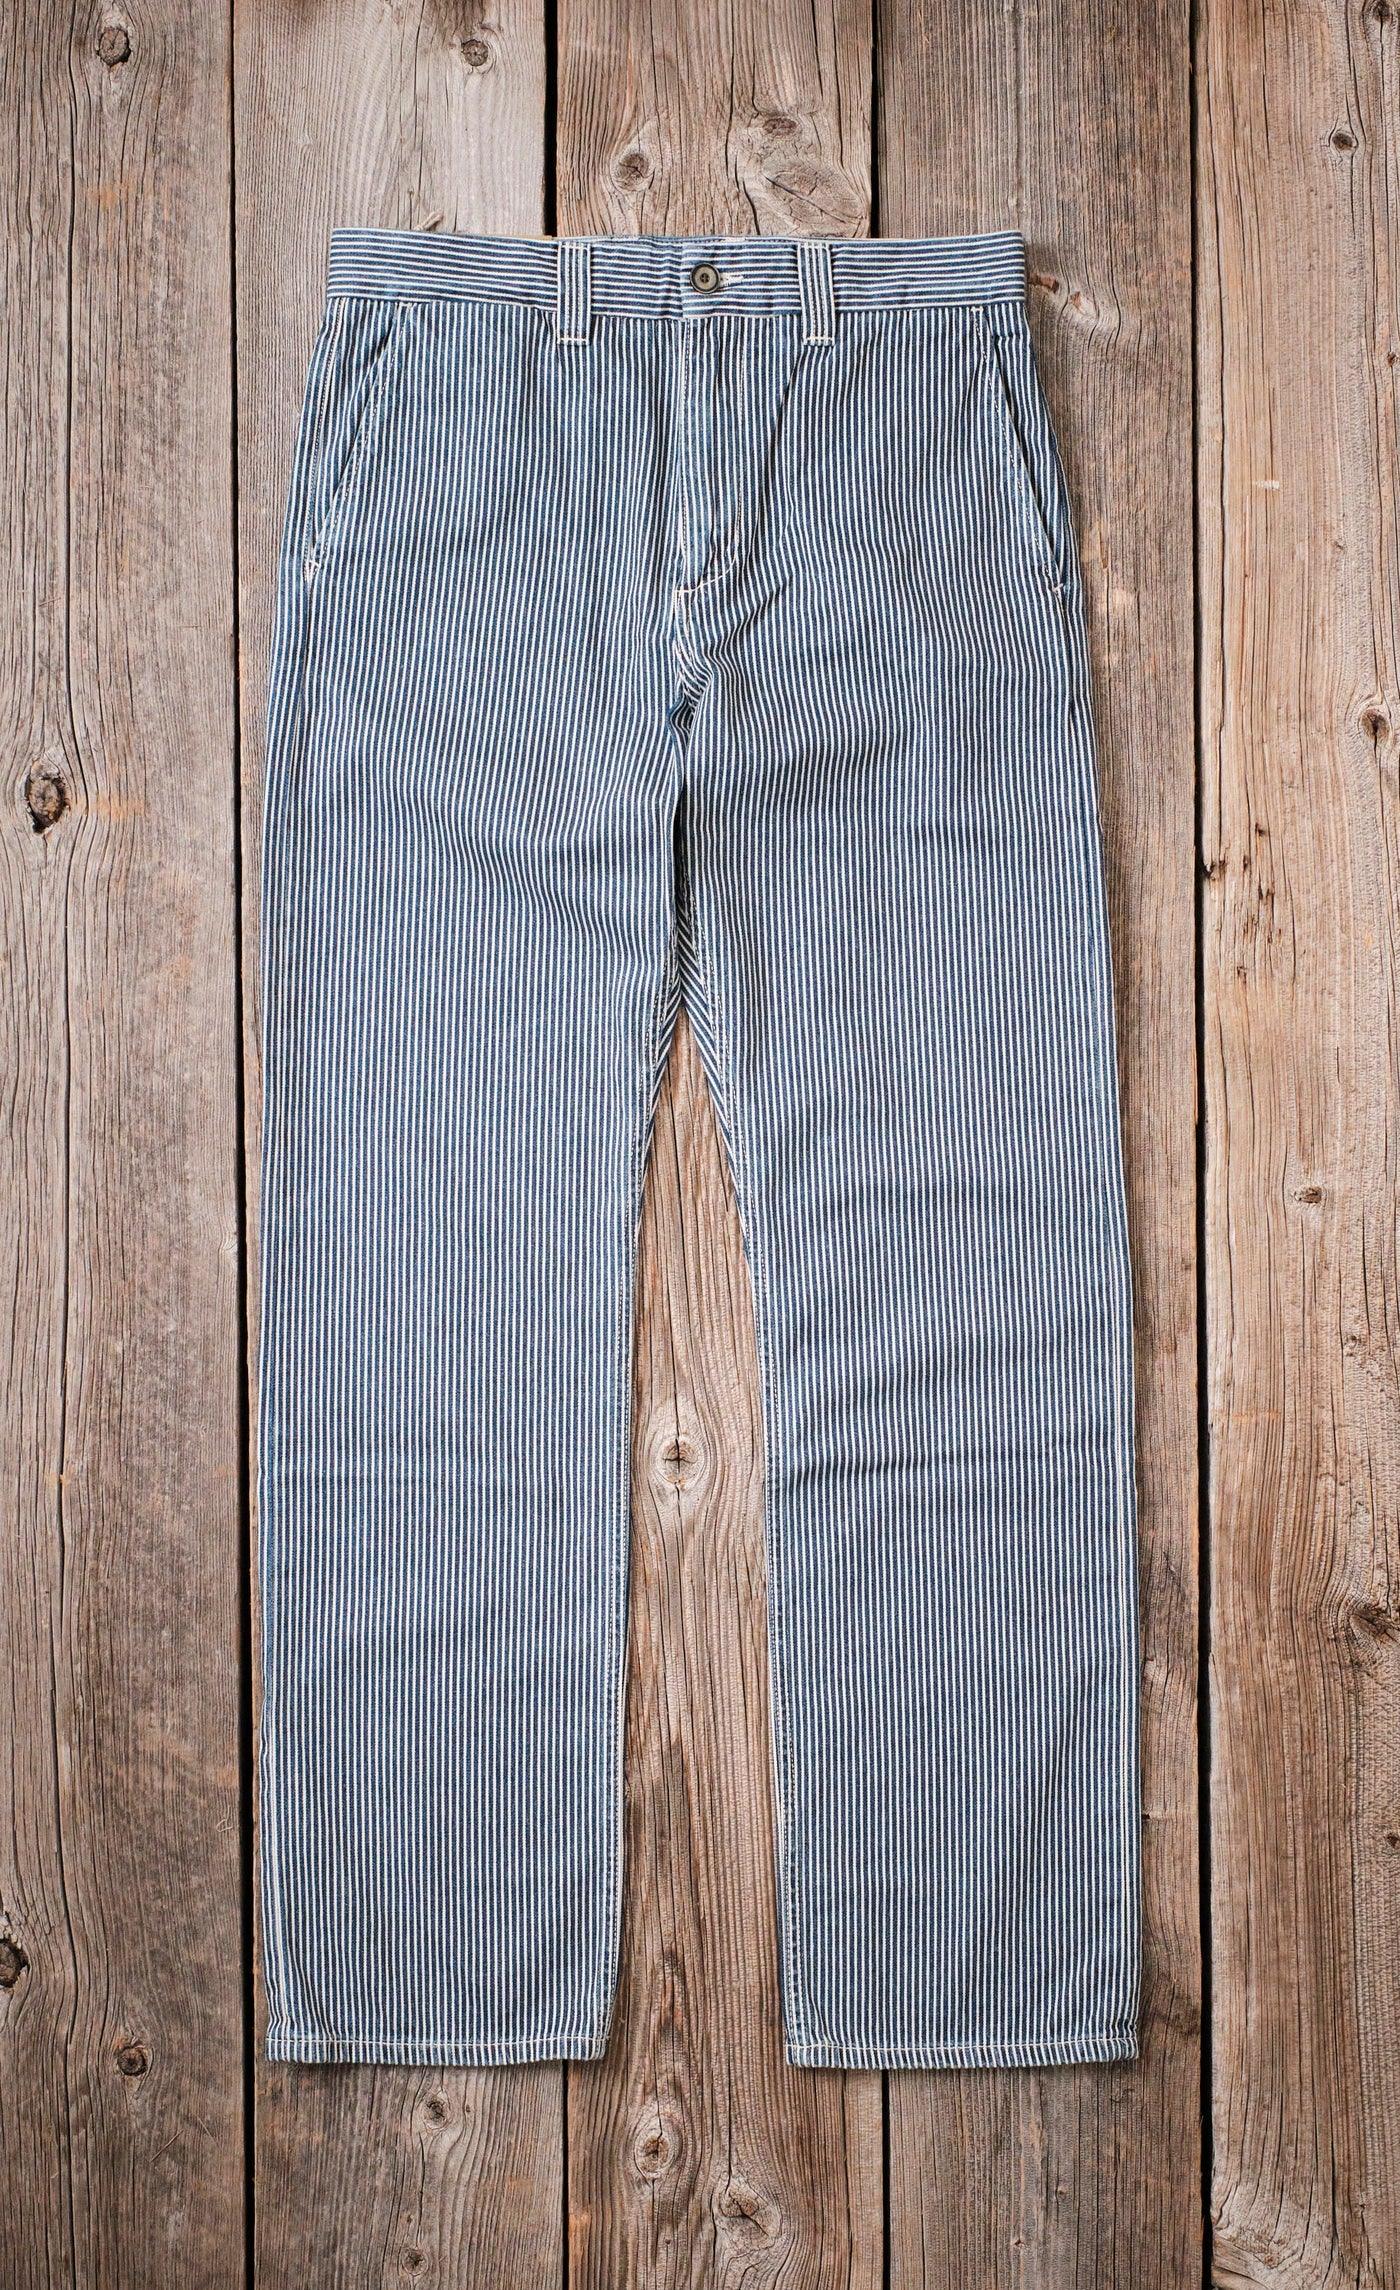 Freenote Cloth Deck Pant Straight Fit - Indigo Stripe - Guilty Party